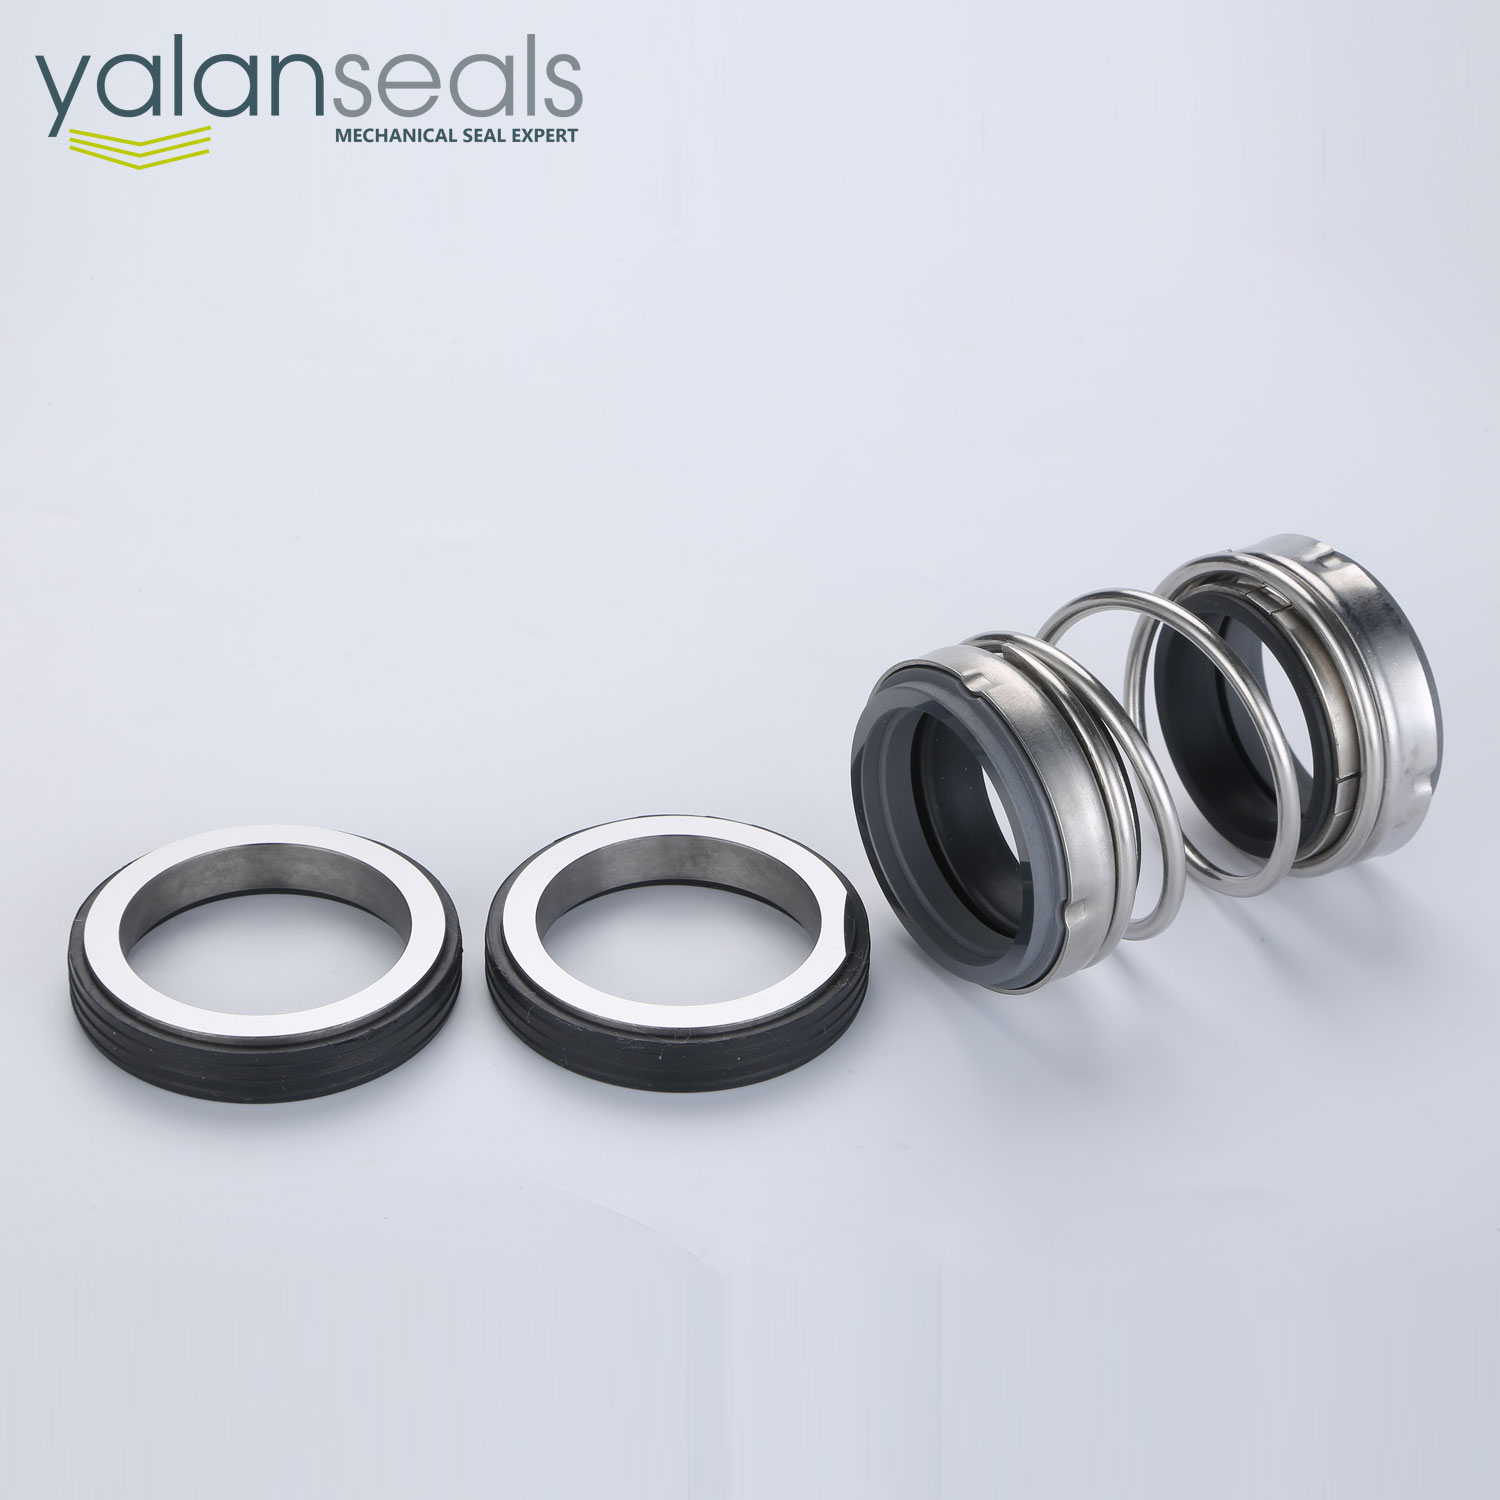 YALAN SDM Double End Back to Back Mechanical Seals for Clean Water Pumps, Piping Pumps and Vacuum Pumps